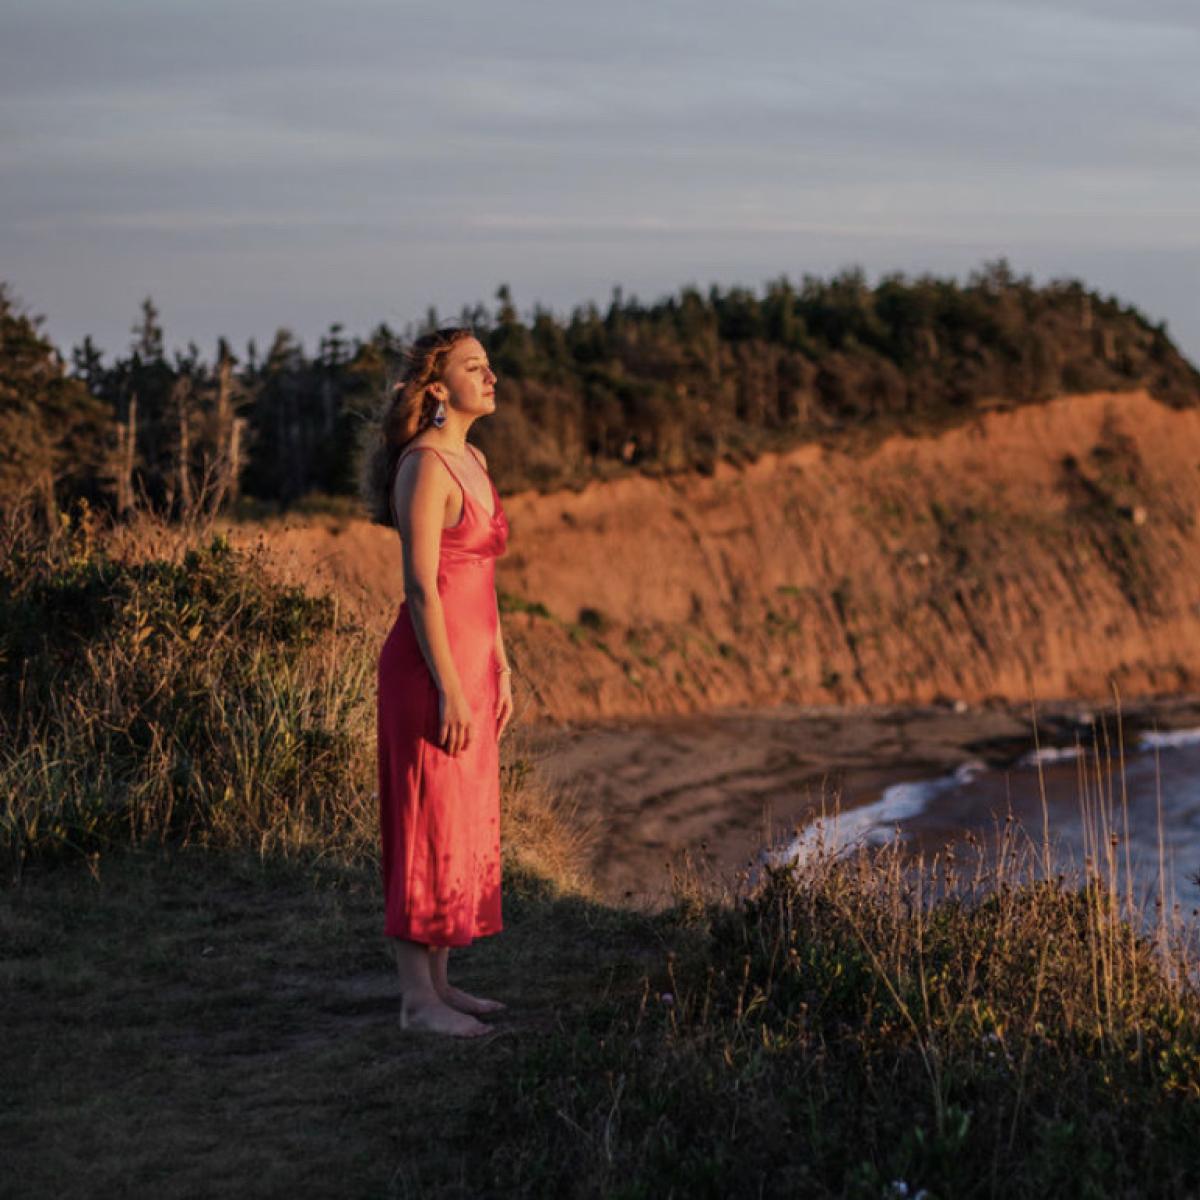 A young blonde woman in a bright red satin dress stands on a red sandy cliff overlooking the ocean.